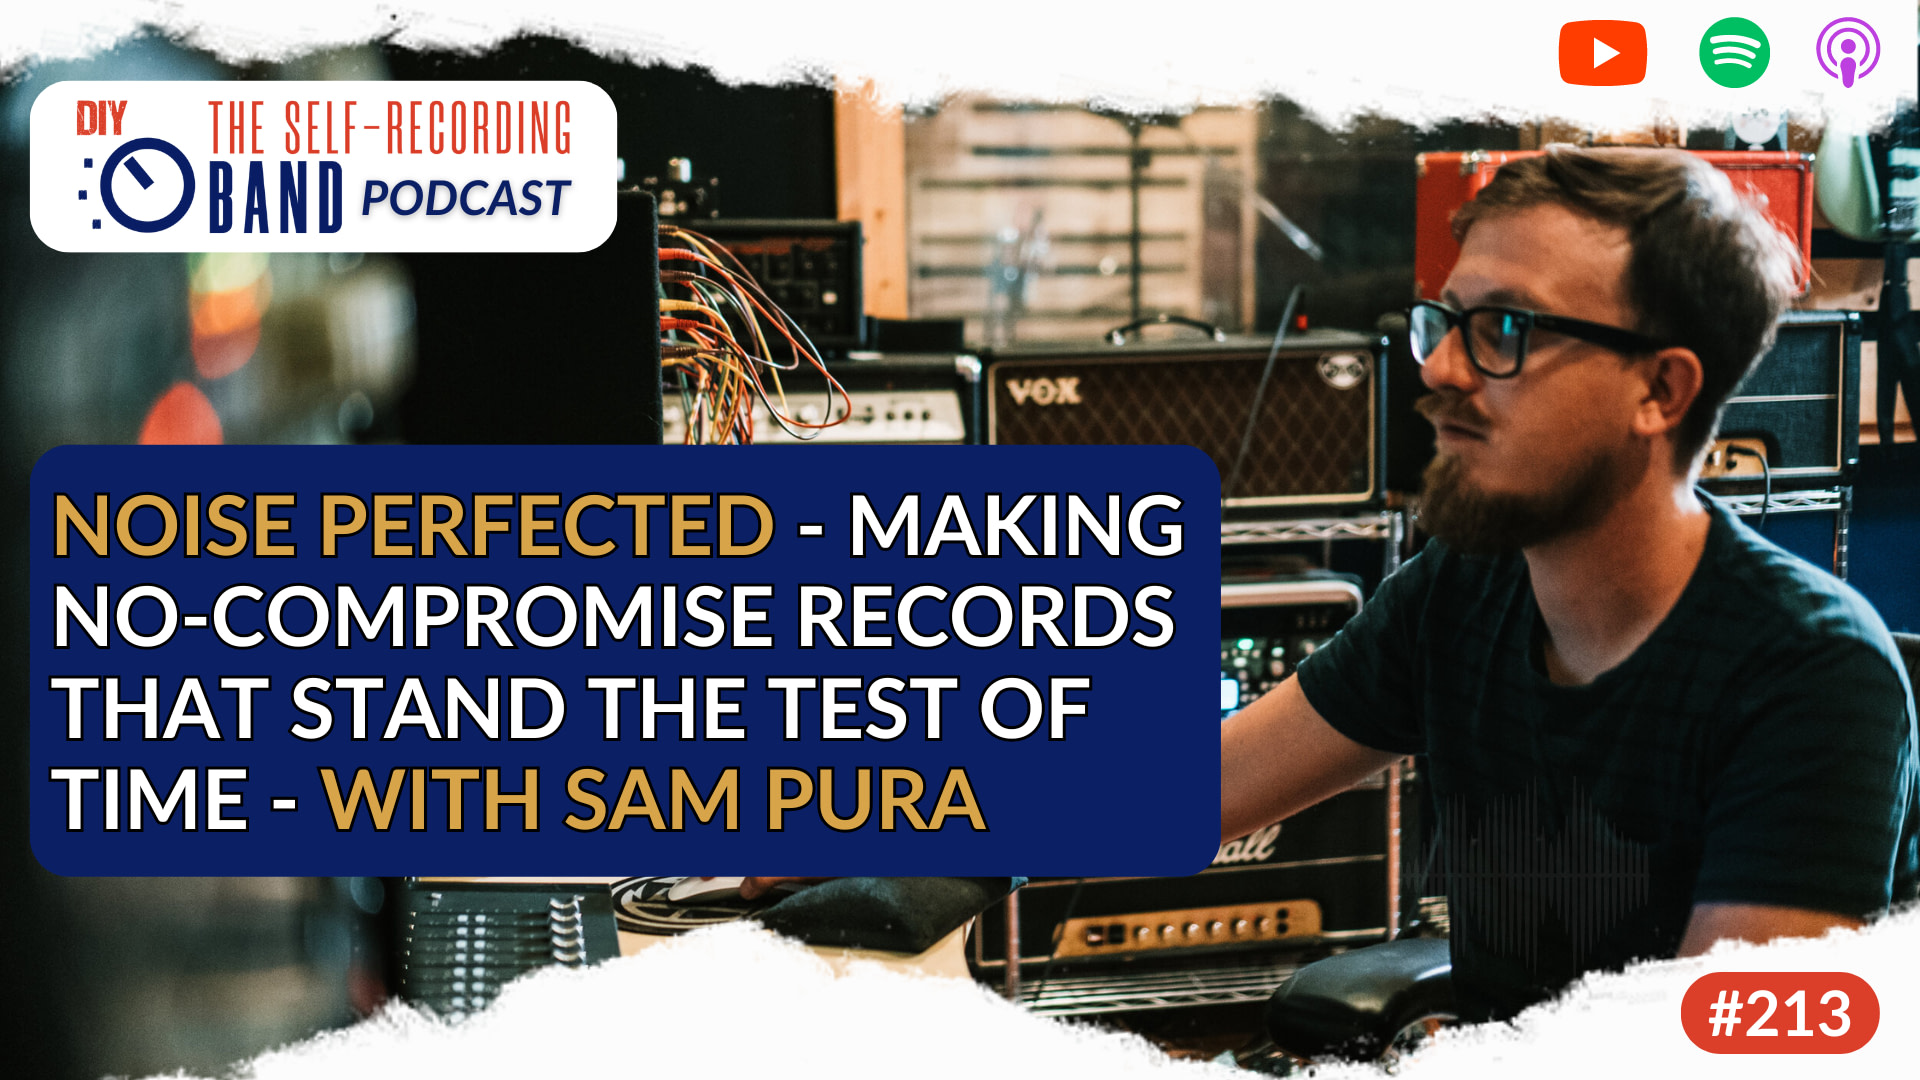 Noise Perfected - Making No-Compromise Records That Stand The Test Of Time - With Sam Pura